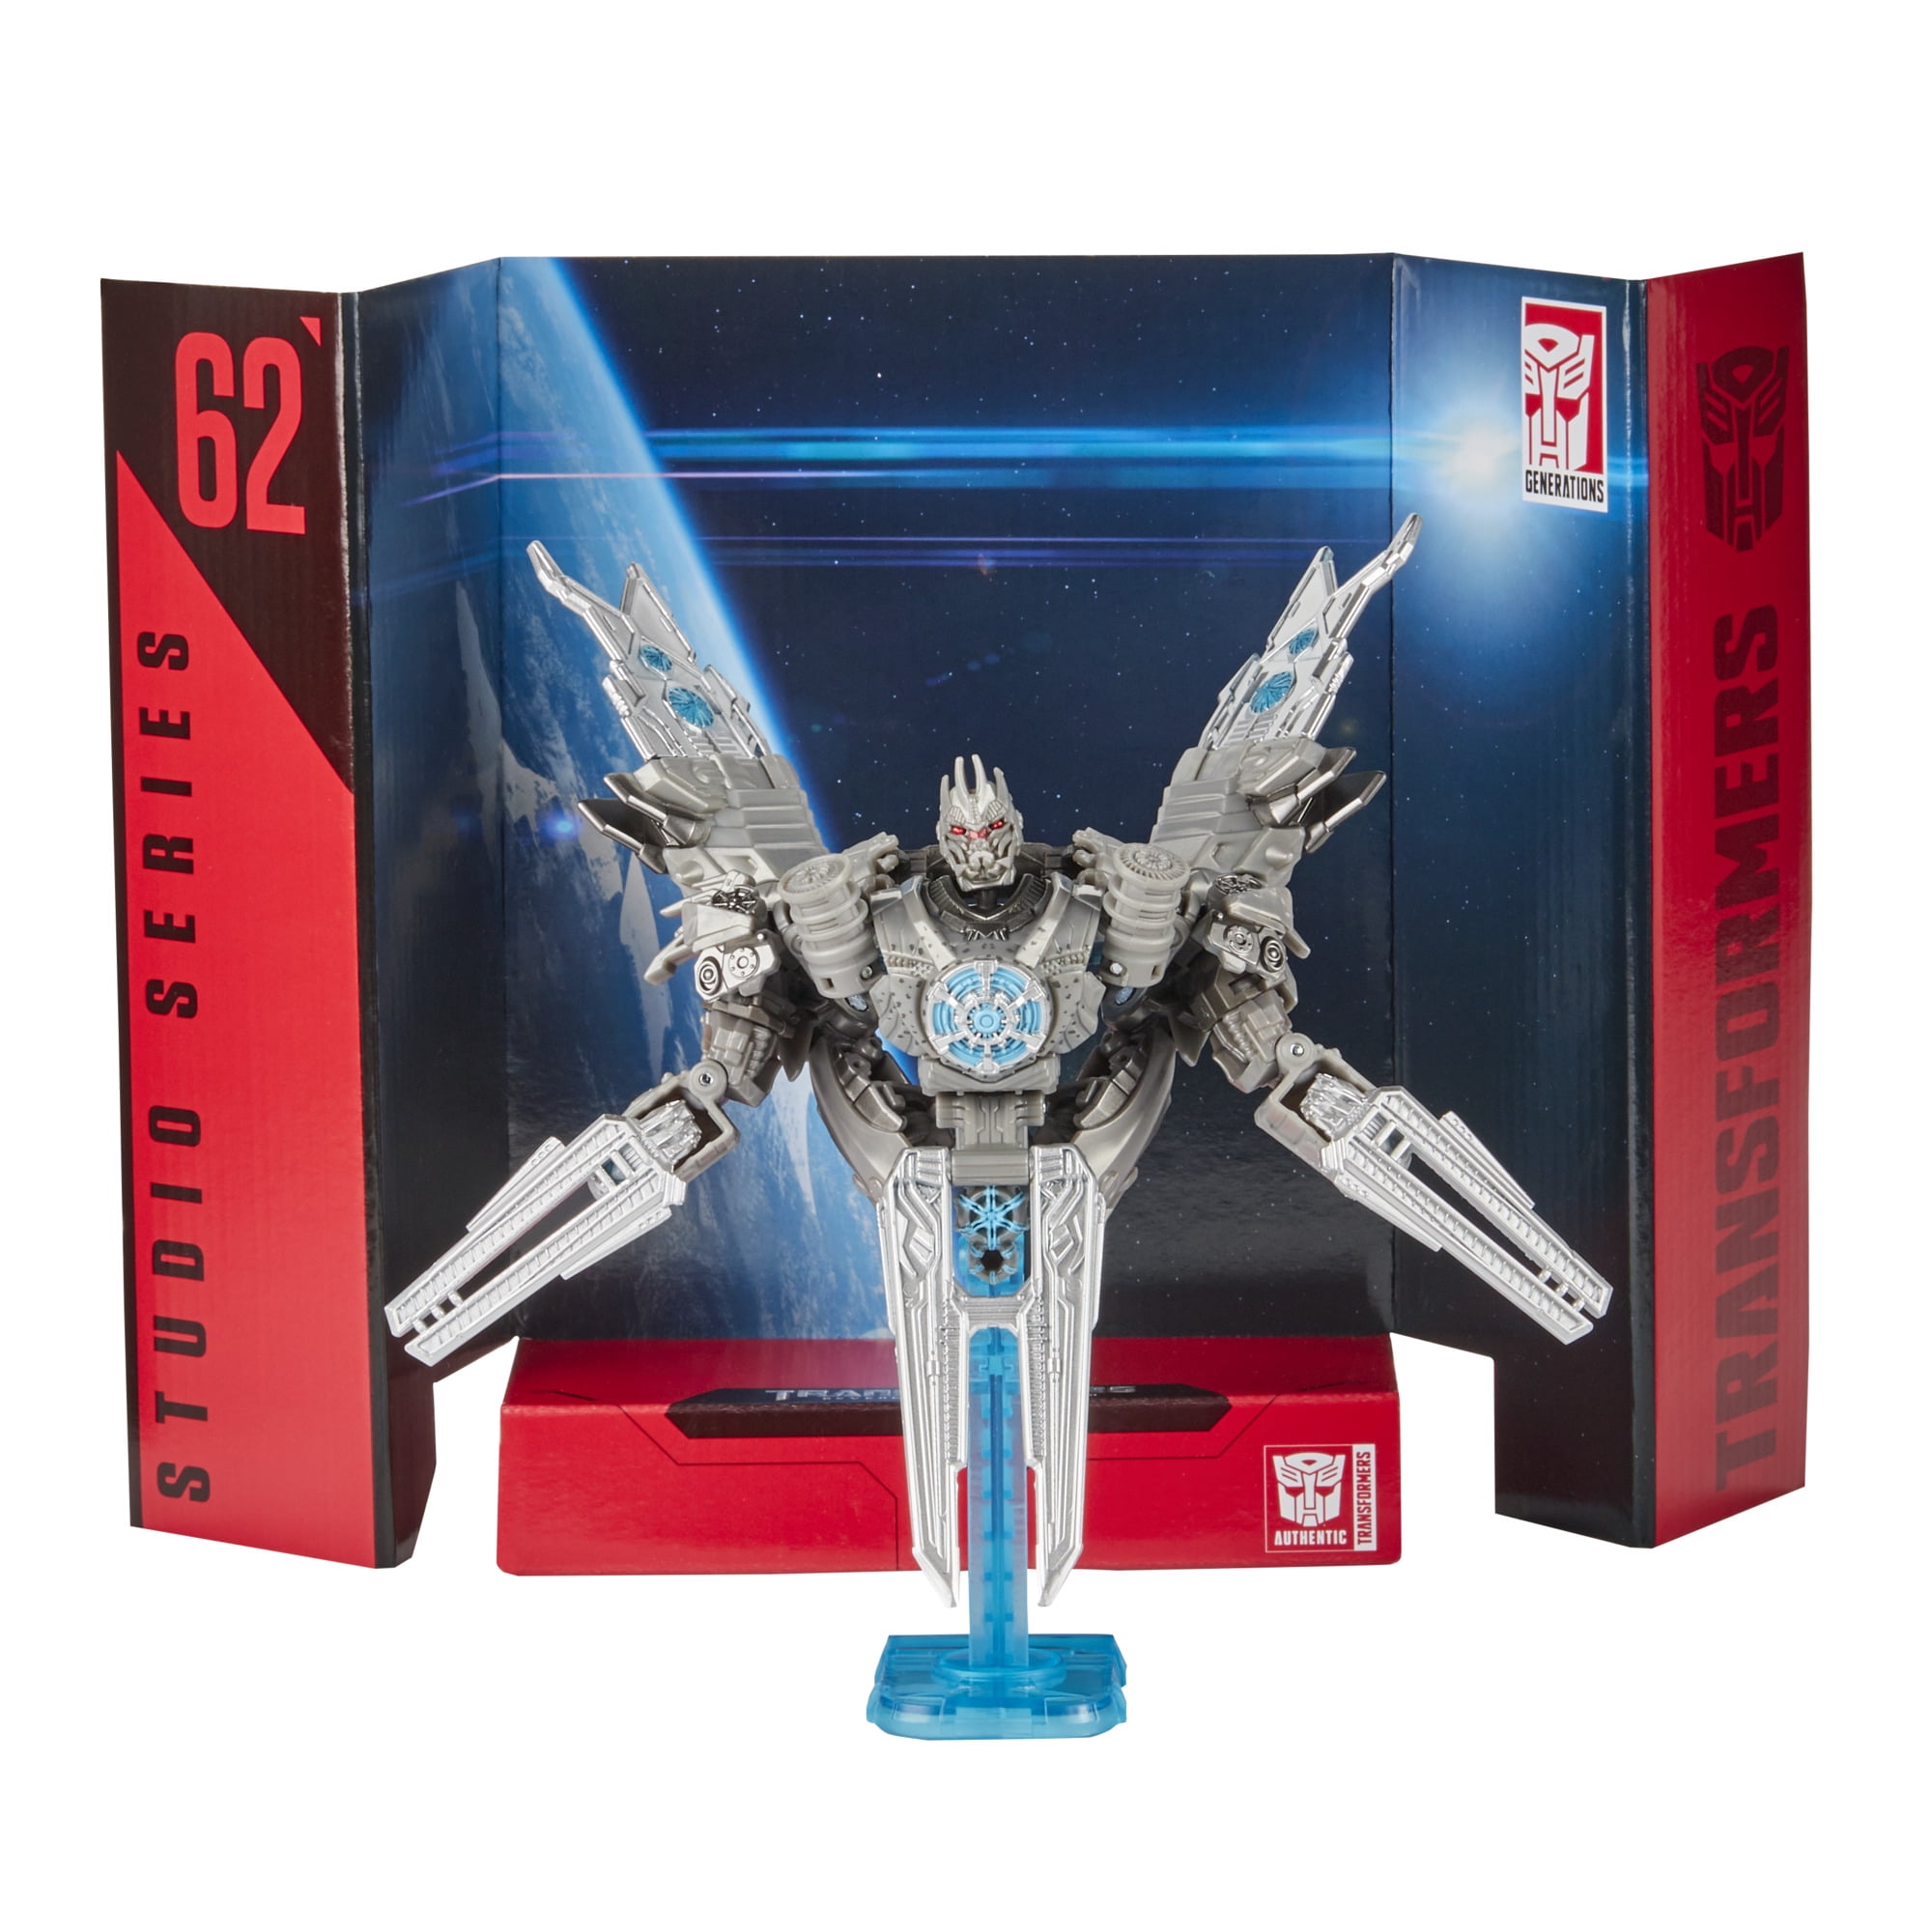 Hasbro Transformers Generations Selects Deluxe Class Ricochet Action Figure for sale online 